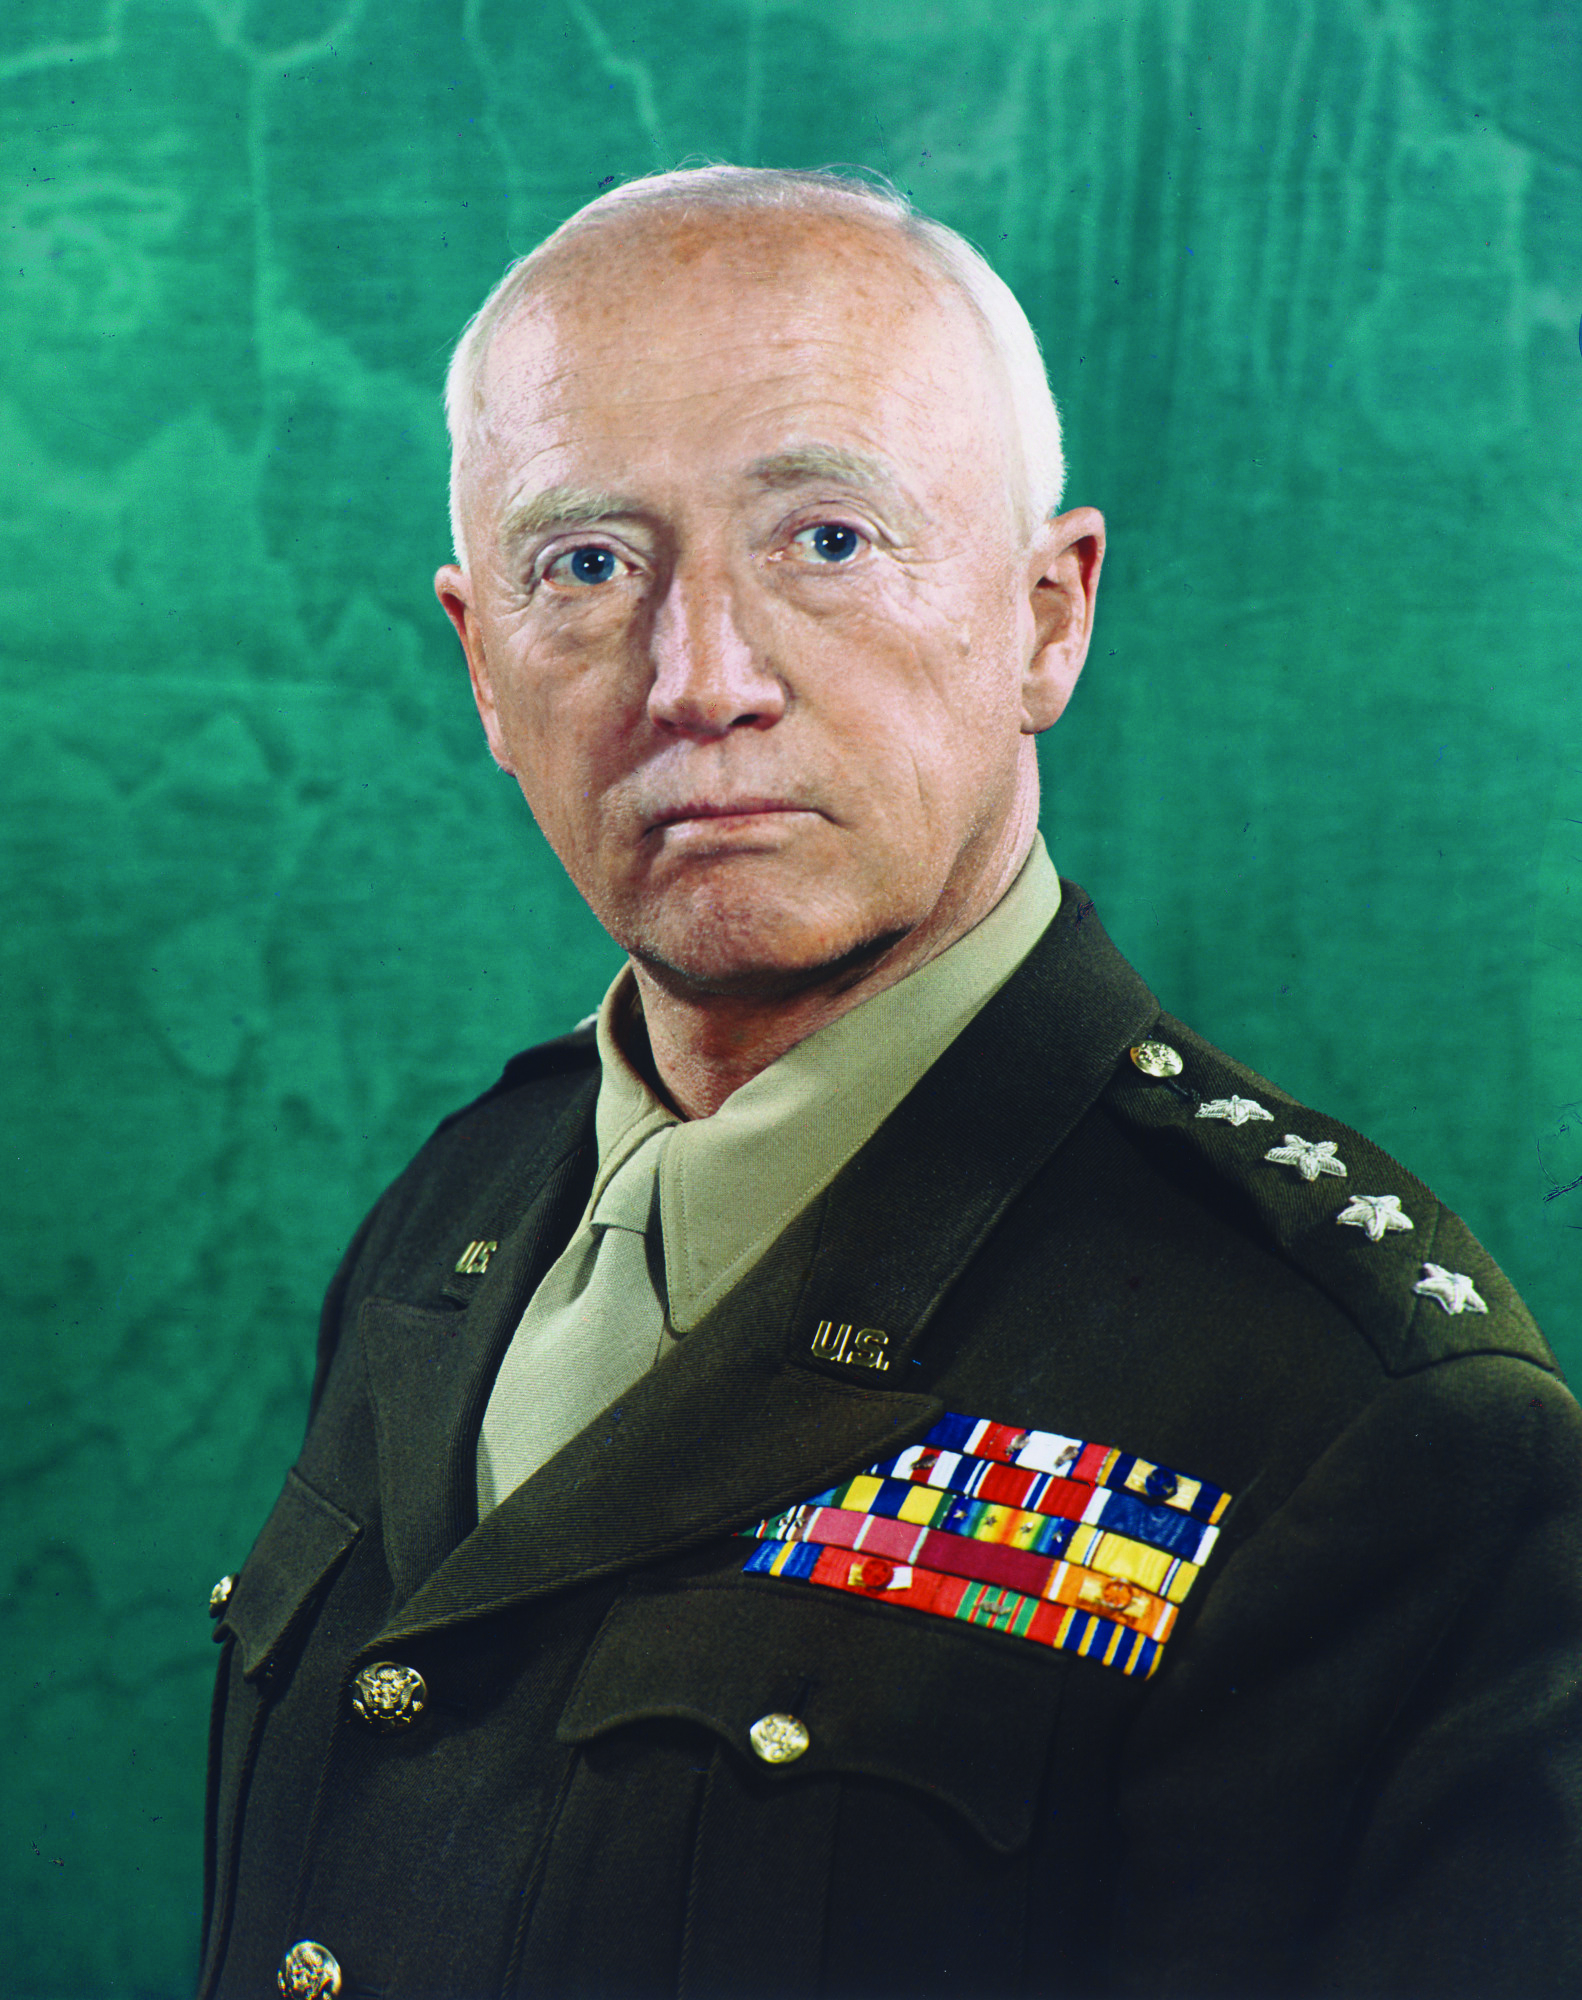 General George S. Patton confirmed the findings
        and sentence in Schneeweis. The wording of his
        action expressed great unhappiness with the result
        in the trial. (Photo courtesy of author)